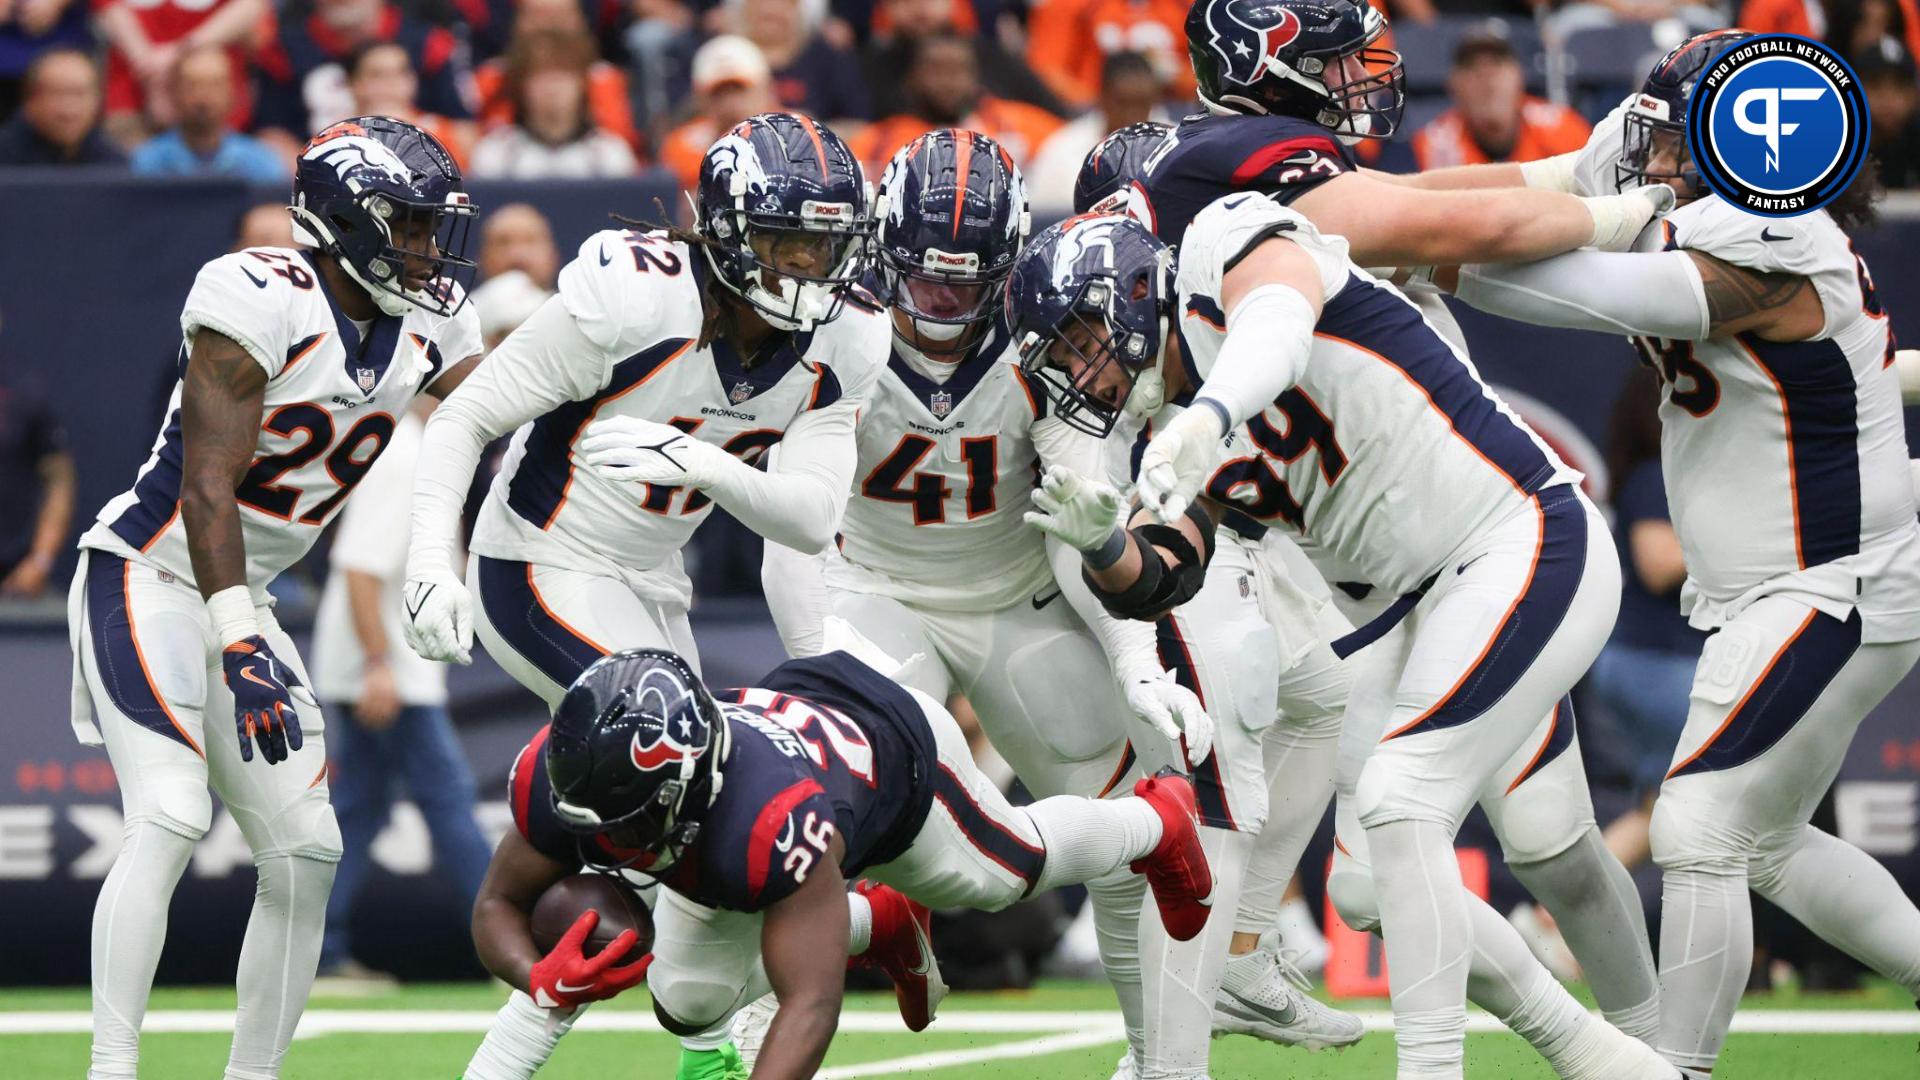 Houston Texans running back Devin Singletary (26) is tackled by Denver Broncos defensive end Zach Allen (99) and teammates for a loss in the second half at NRG Stadium.